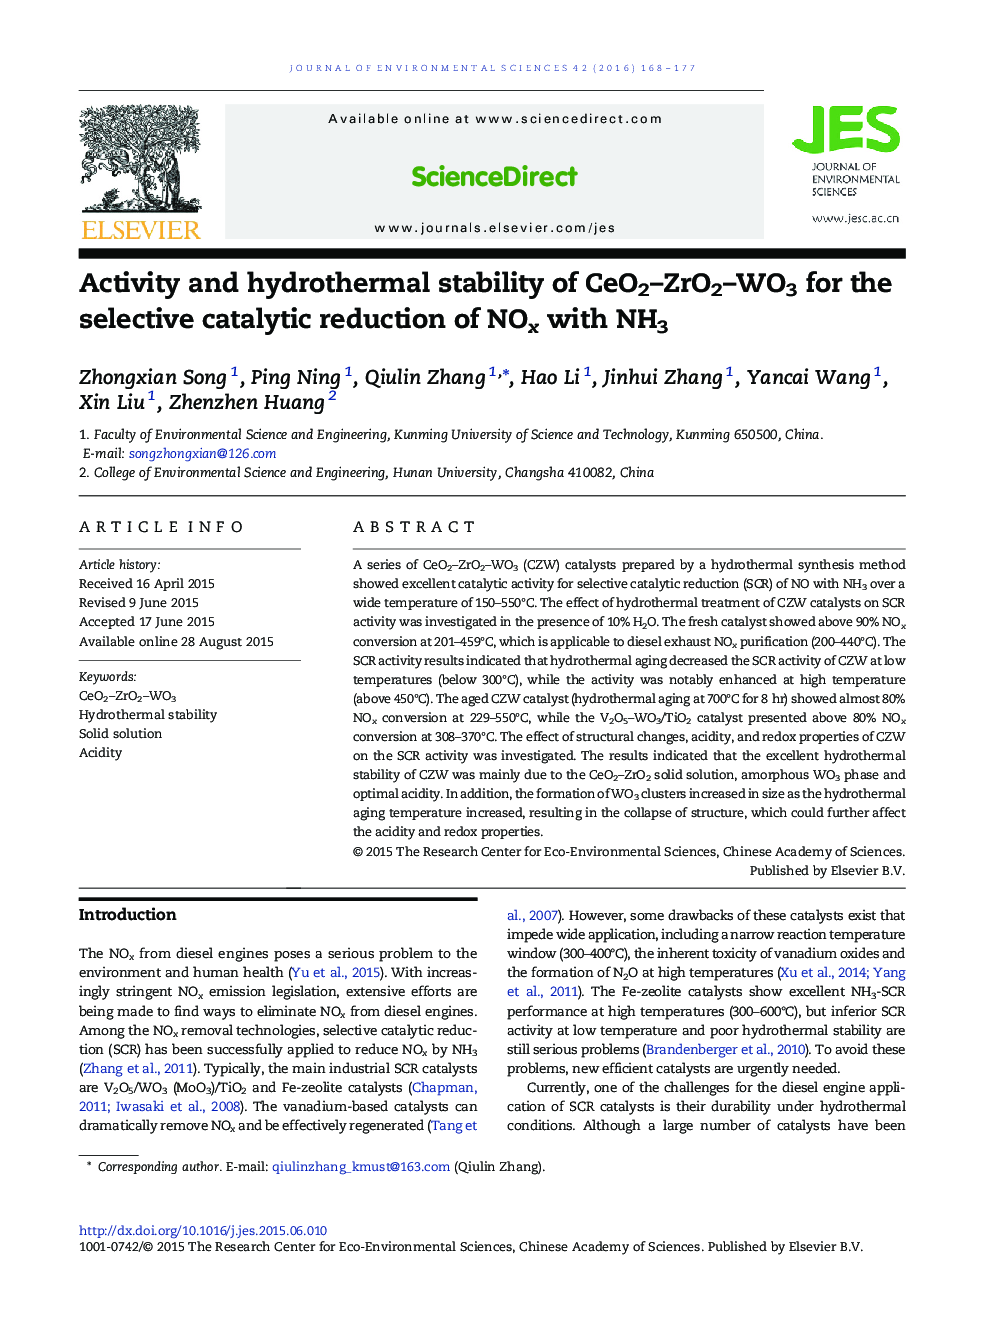 Activity and hydrothermal stability of CeO2–ZrO2–WO3 for the selective catalytic reduction of NOx with NH3